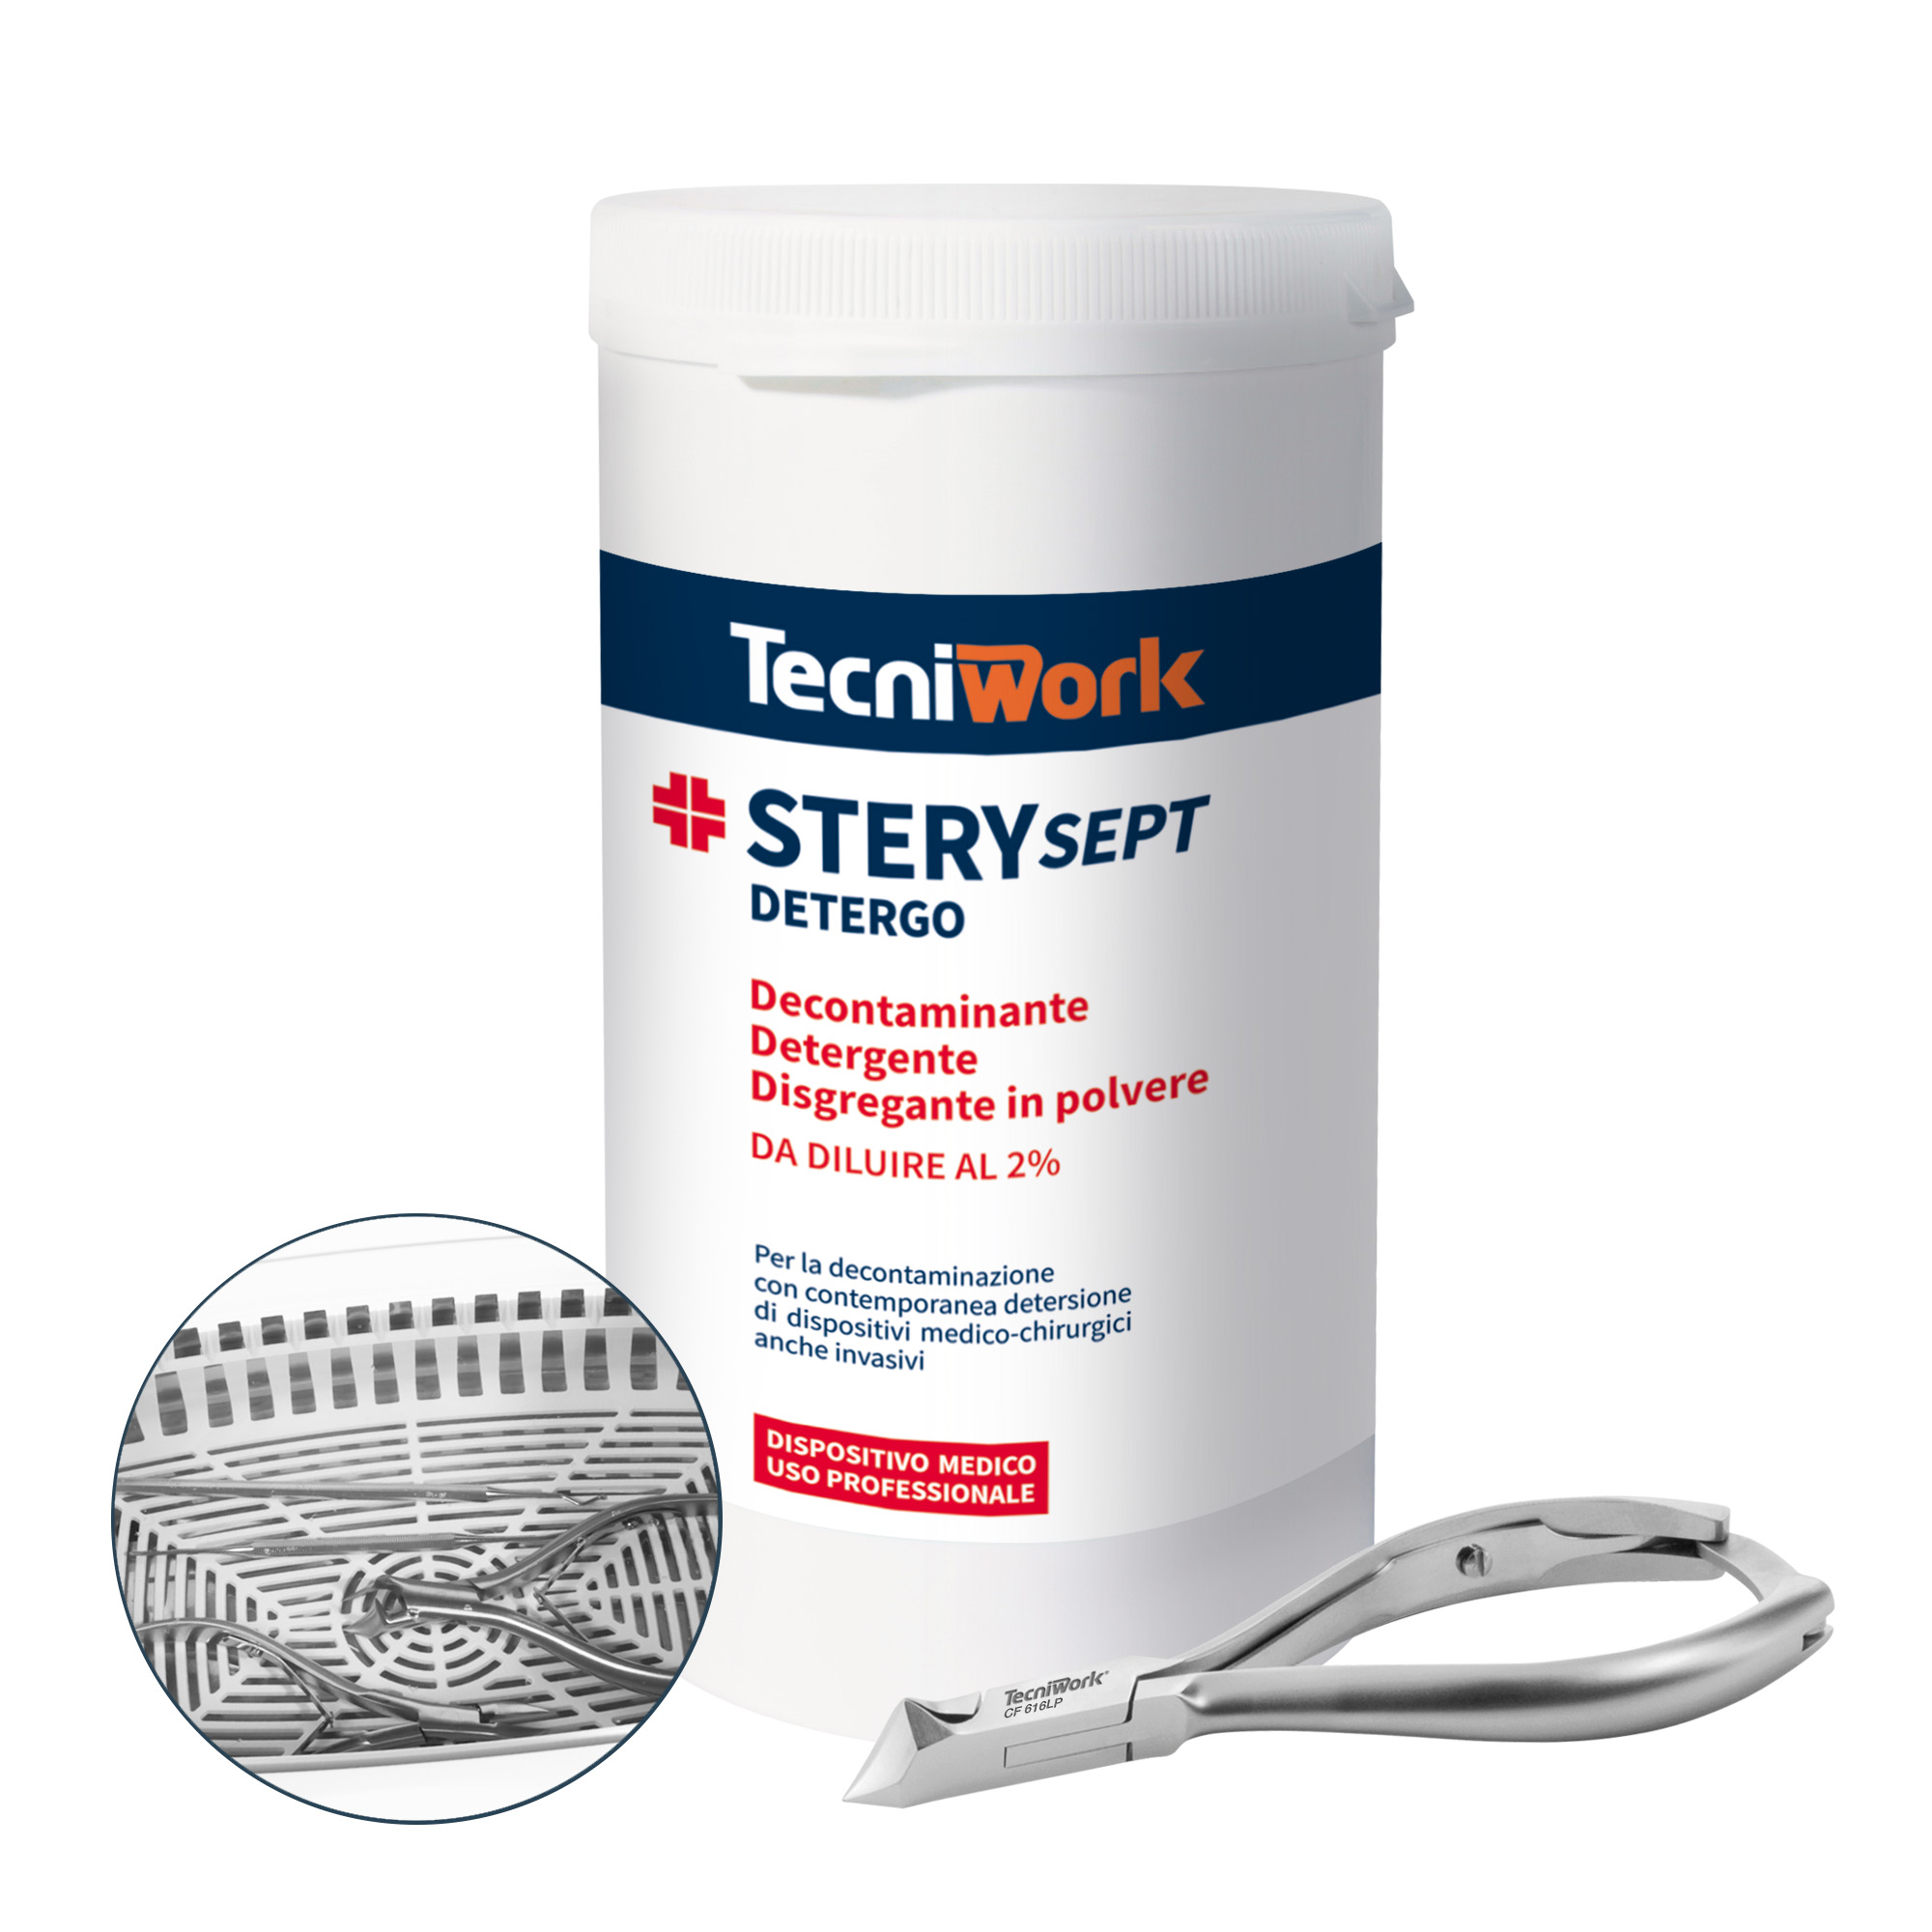 Cold decontaminant, disinfectant and steriliser for instruments with disintegrating enzymes Sterysept Detergo 1 kg